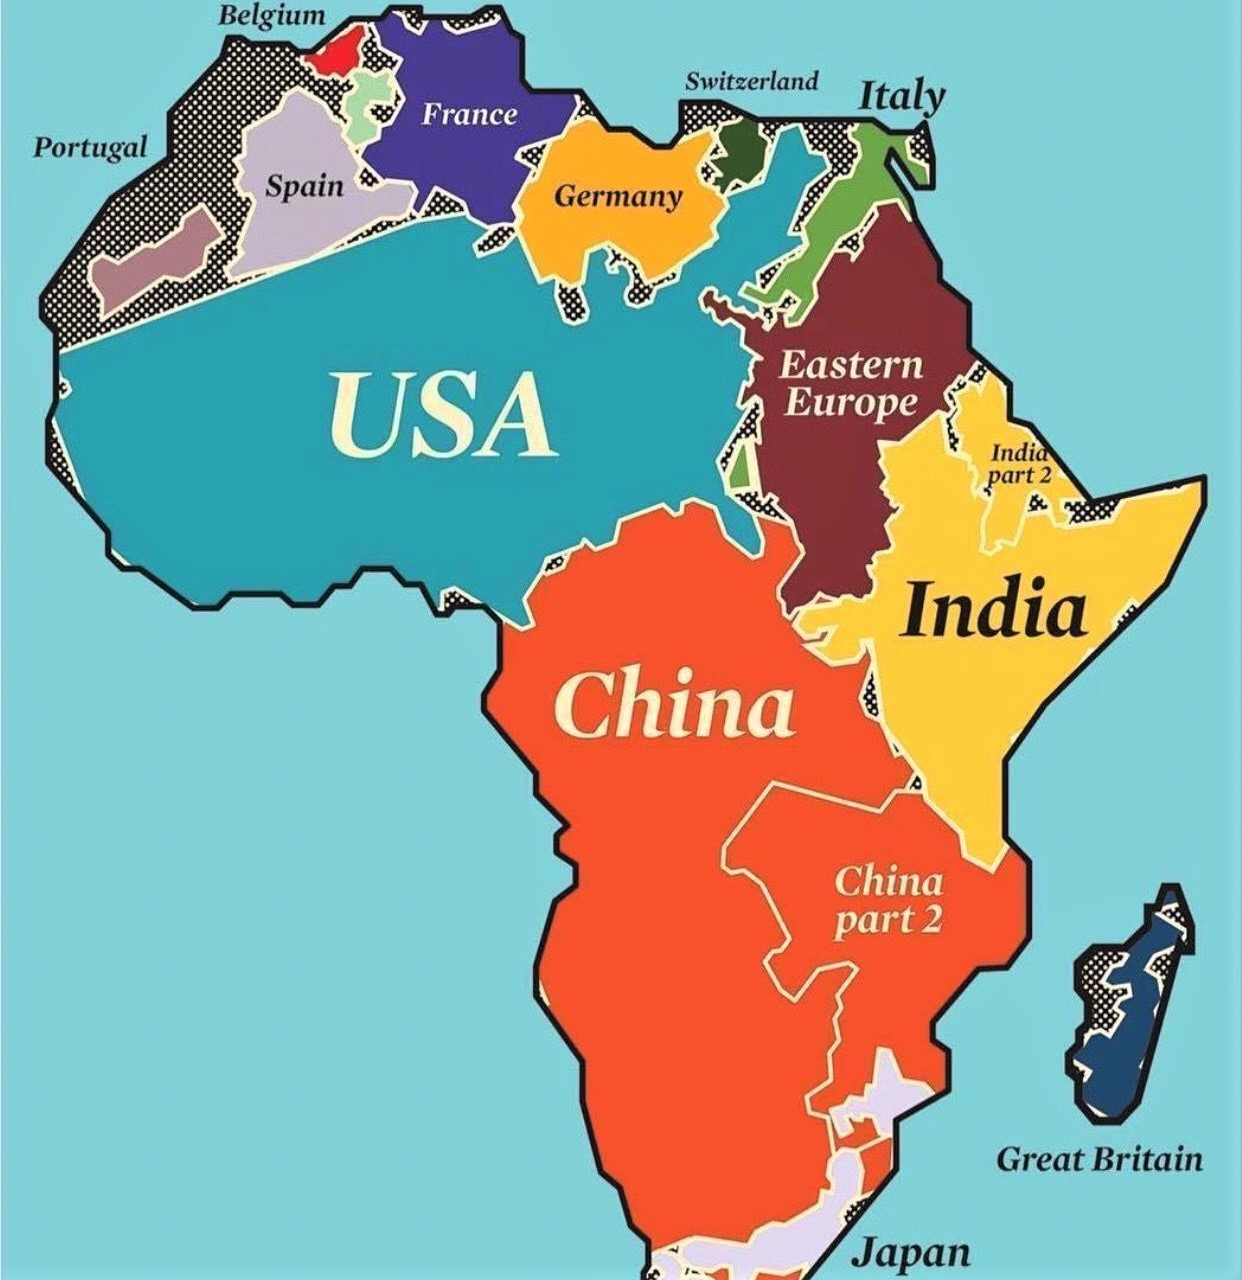 Africa is 14 times as big as Greenland, but not on many maps!